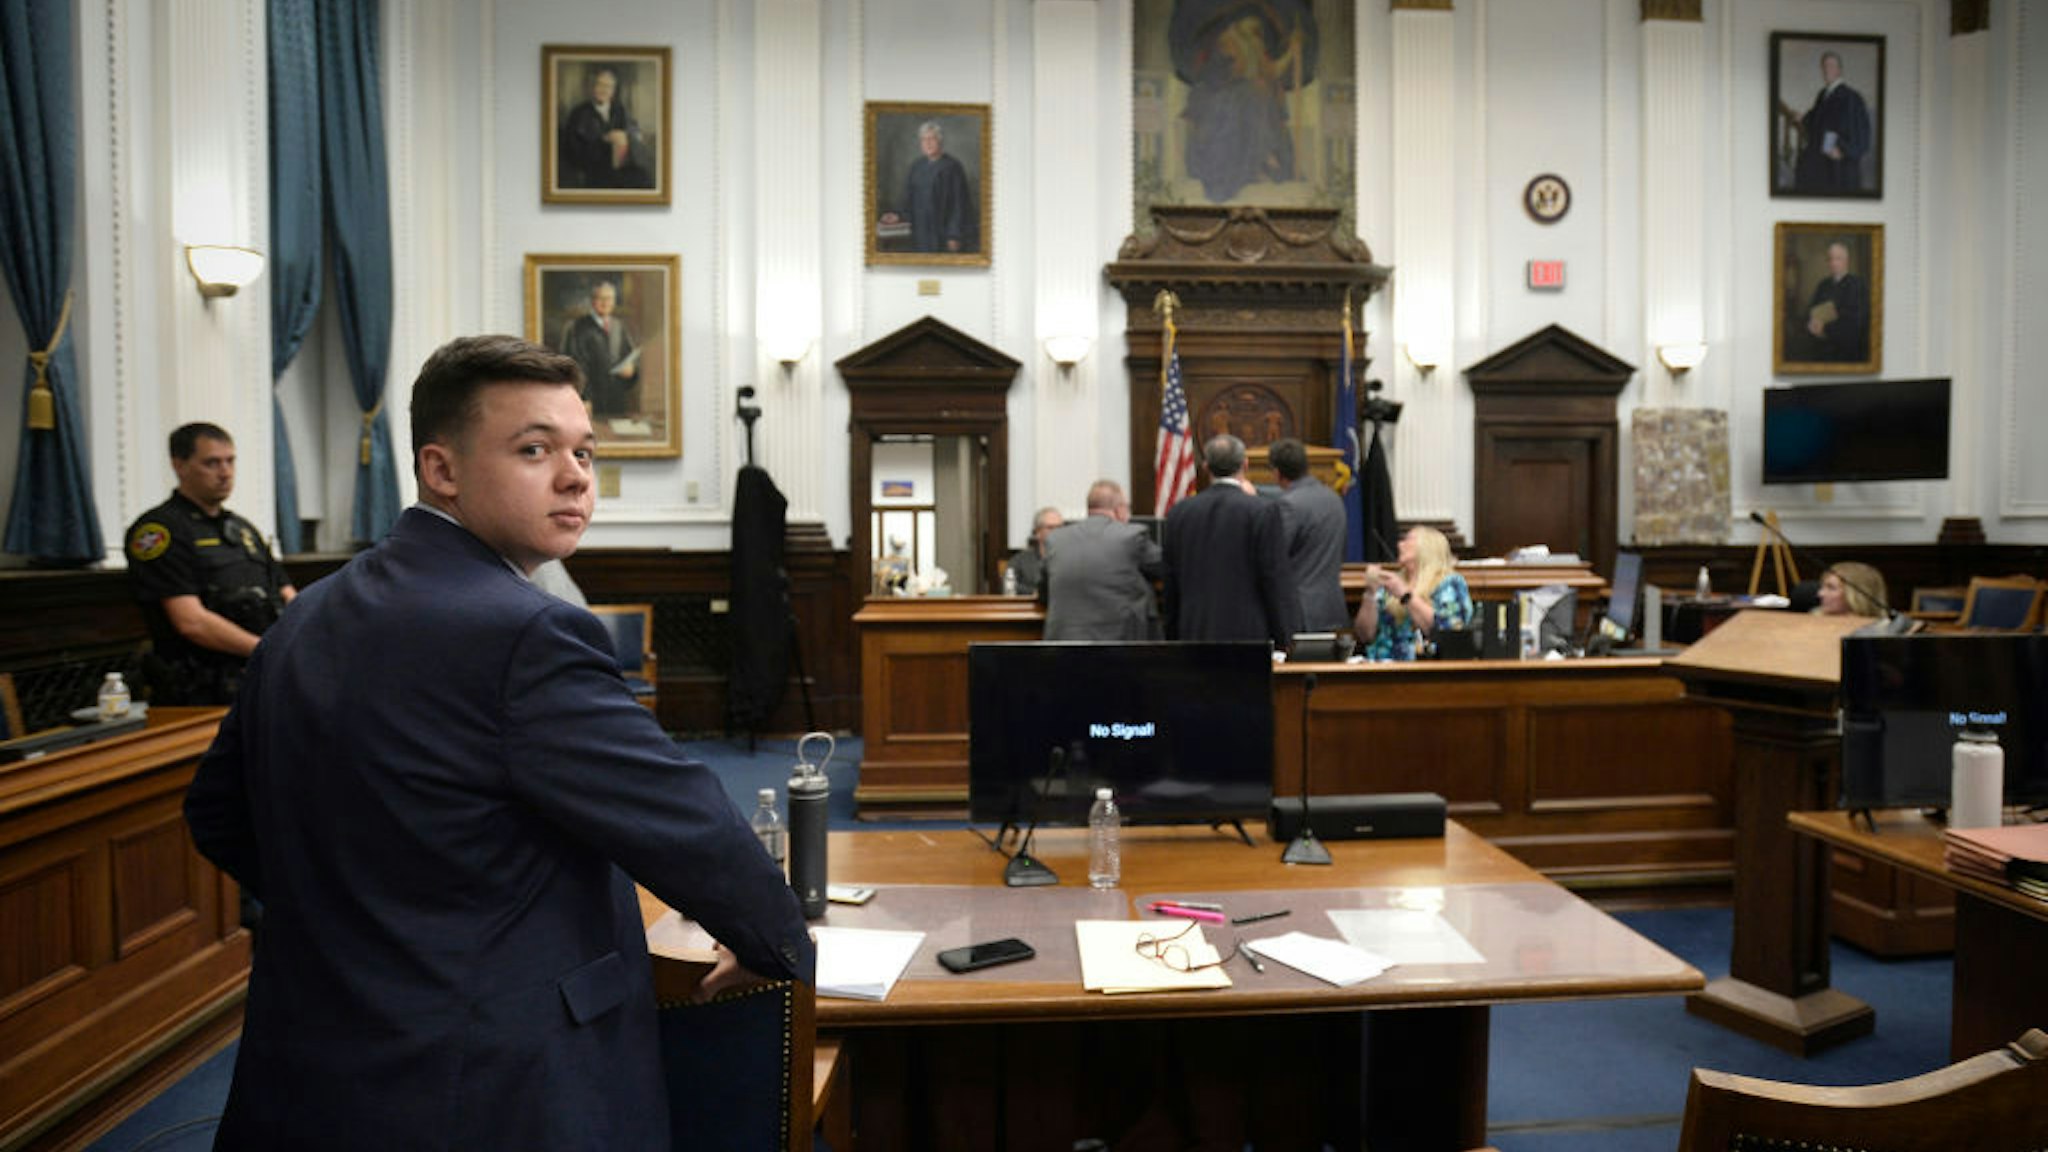 Kyle Rittenhouse waits at his table as his attorneys speak with Judge Bruce Schroeder at the end of the day's proceedings in Rittenhouse's trial at the Kenosha County Courthouse on November 8, 2021 in Kenosha, Wisconsin.